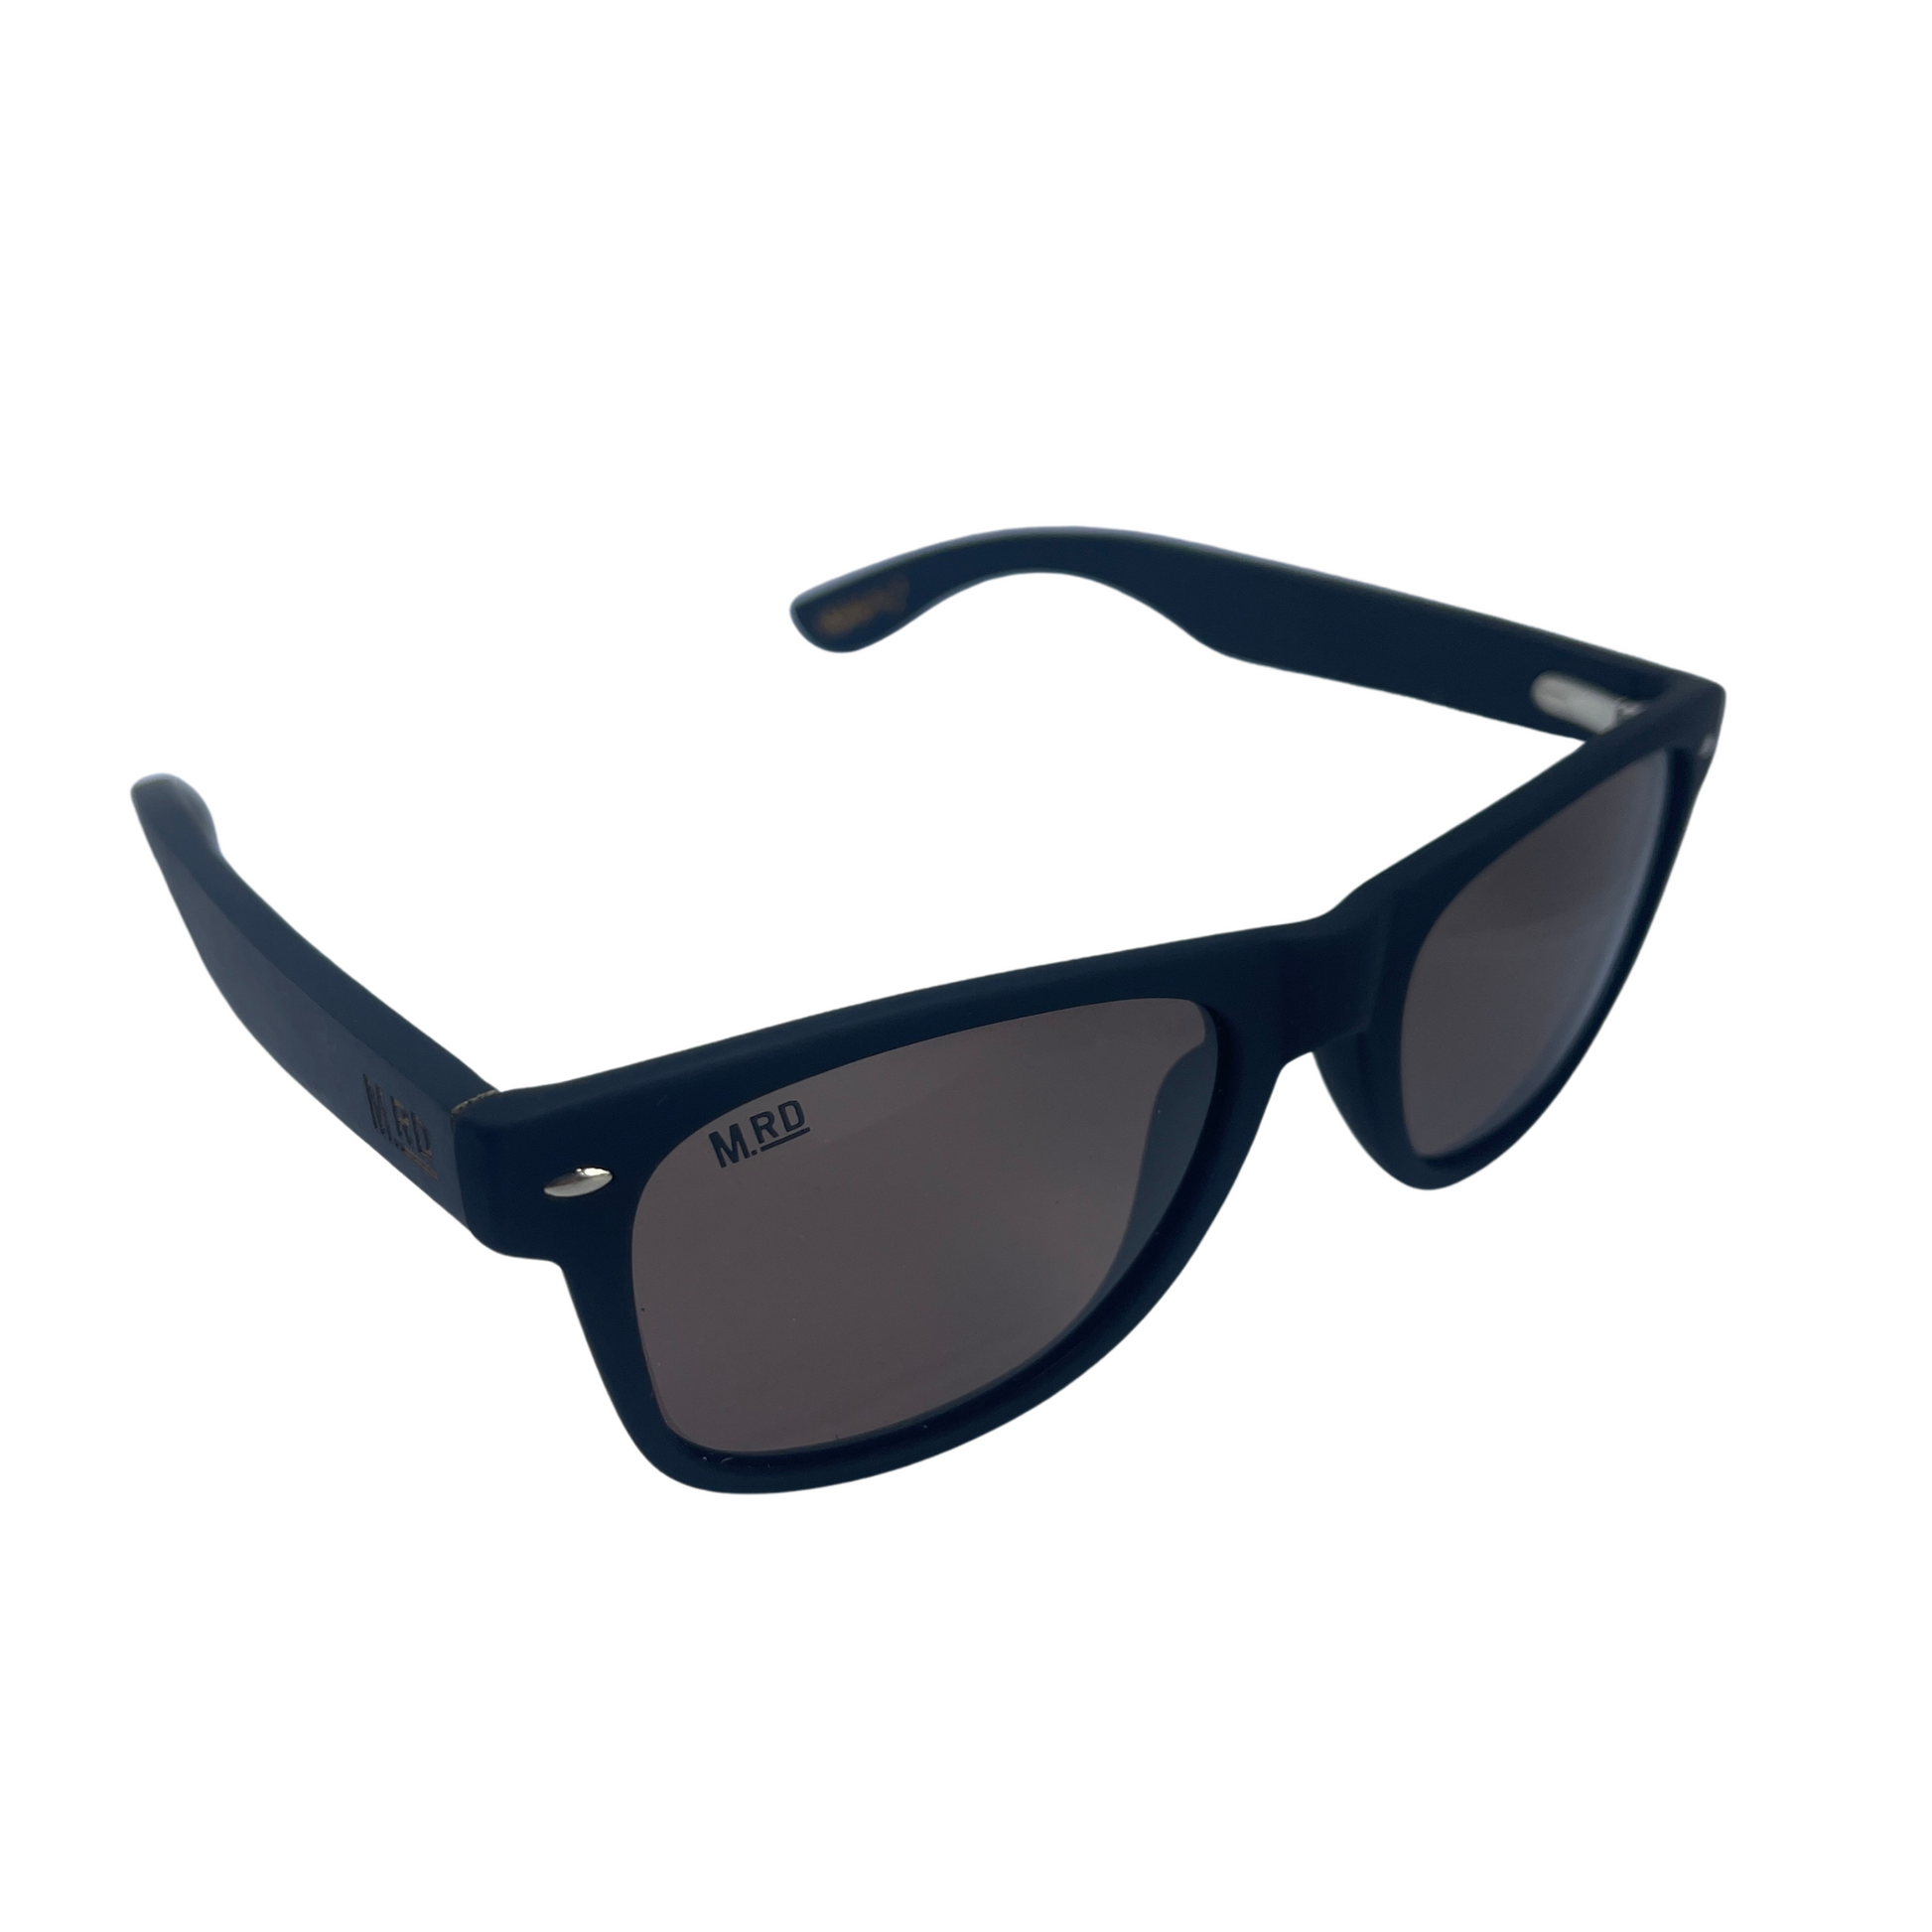 Sunglasses with dark wooden arms, black frames and dark lenses.